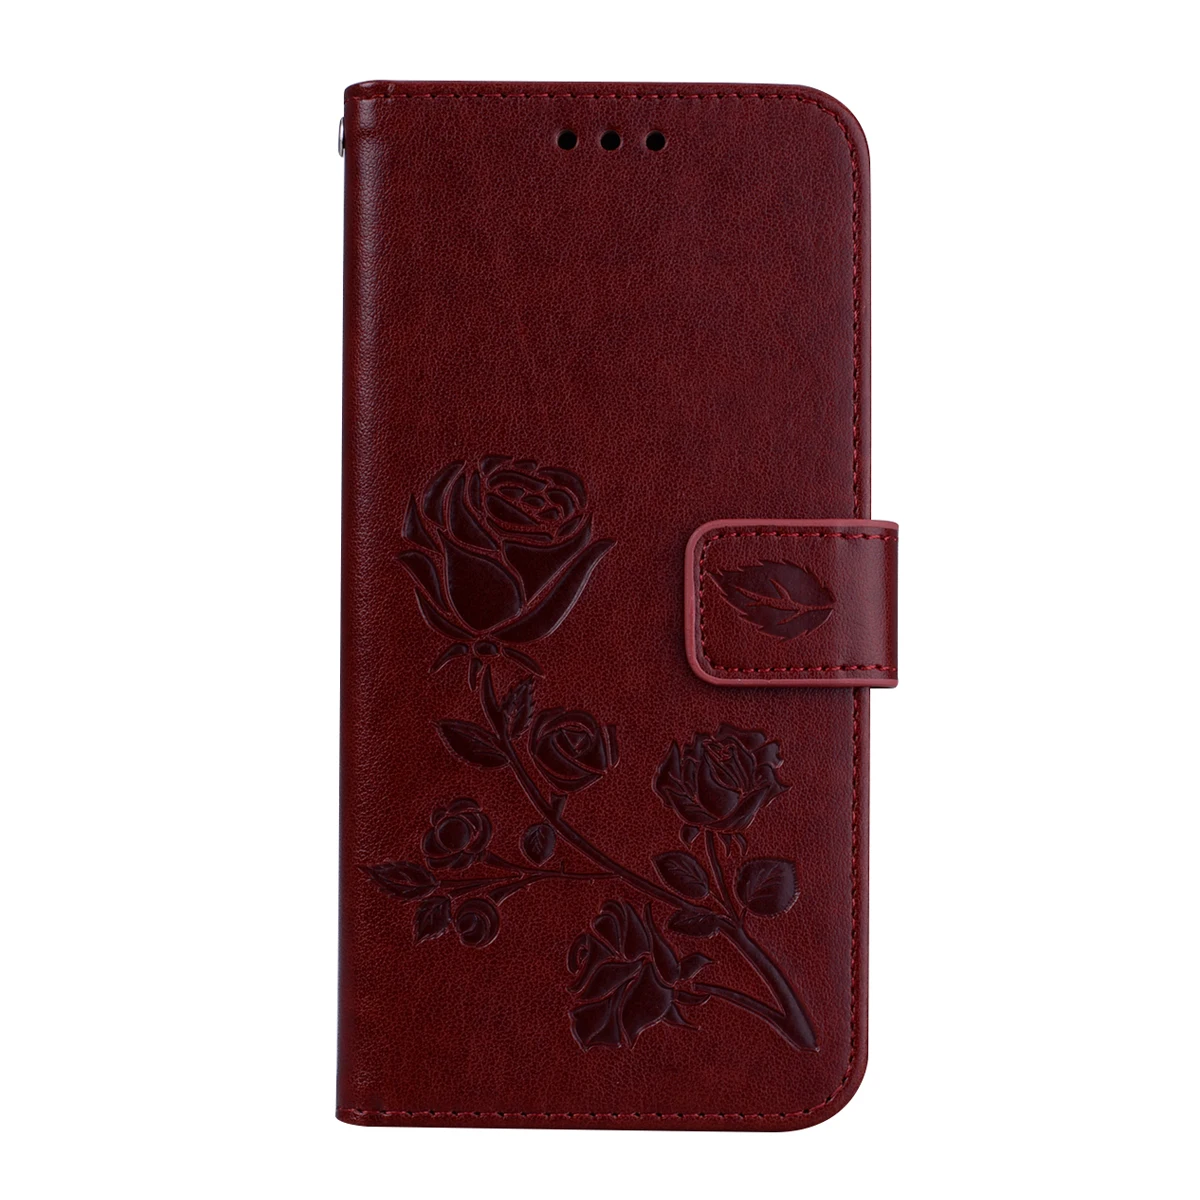 3D Embossing Flip Leather Case For Xiaomi Remdi Note 8 Pro Redmi 8A RedmiNOTE8 nOTE8 8 Pro Rose flower Cover coque xiaomi leather case Cases For Xiaomi